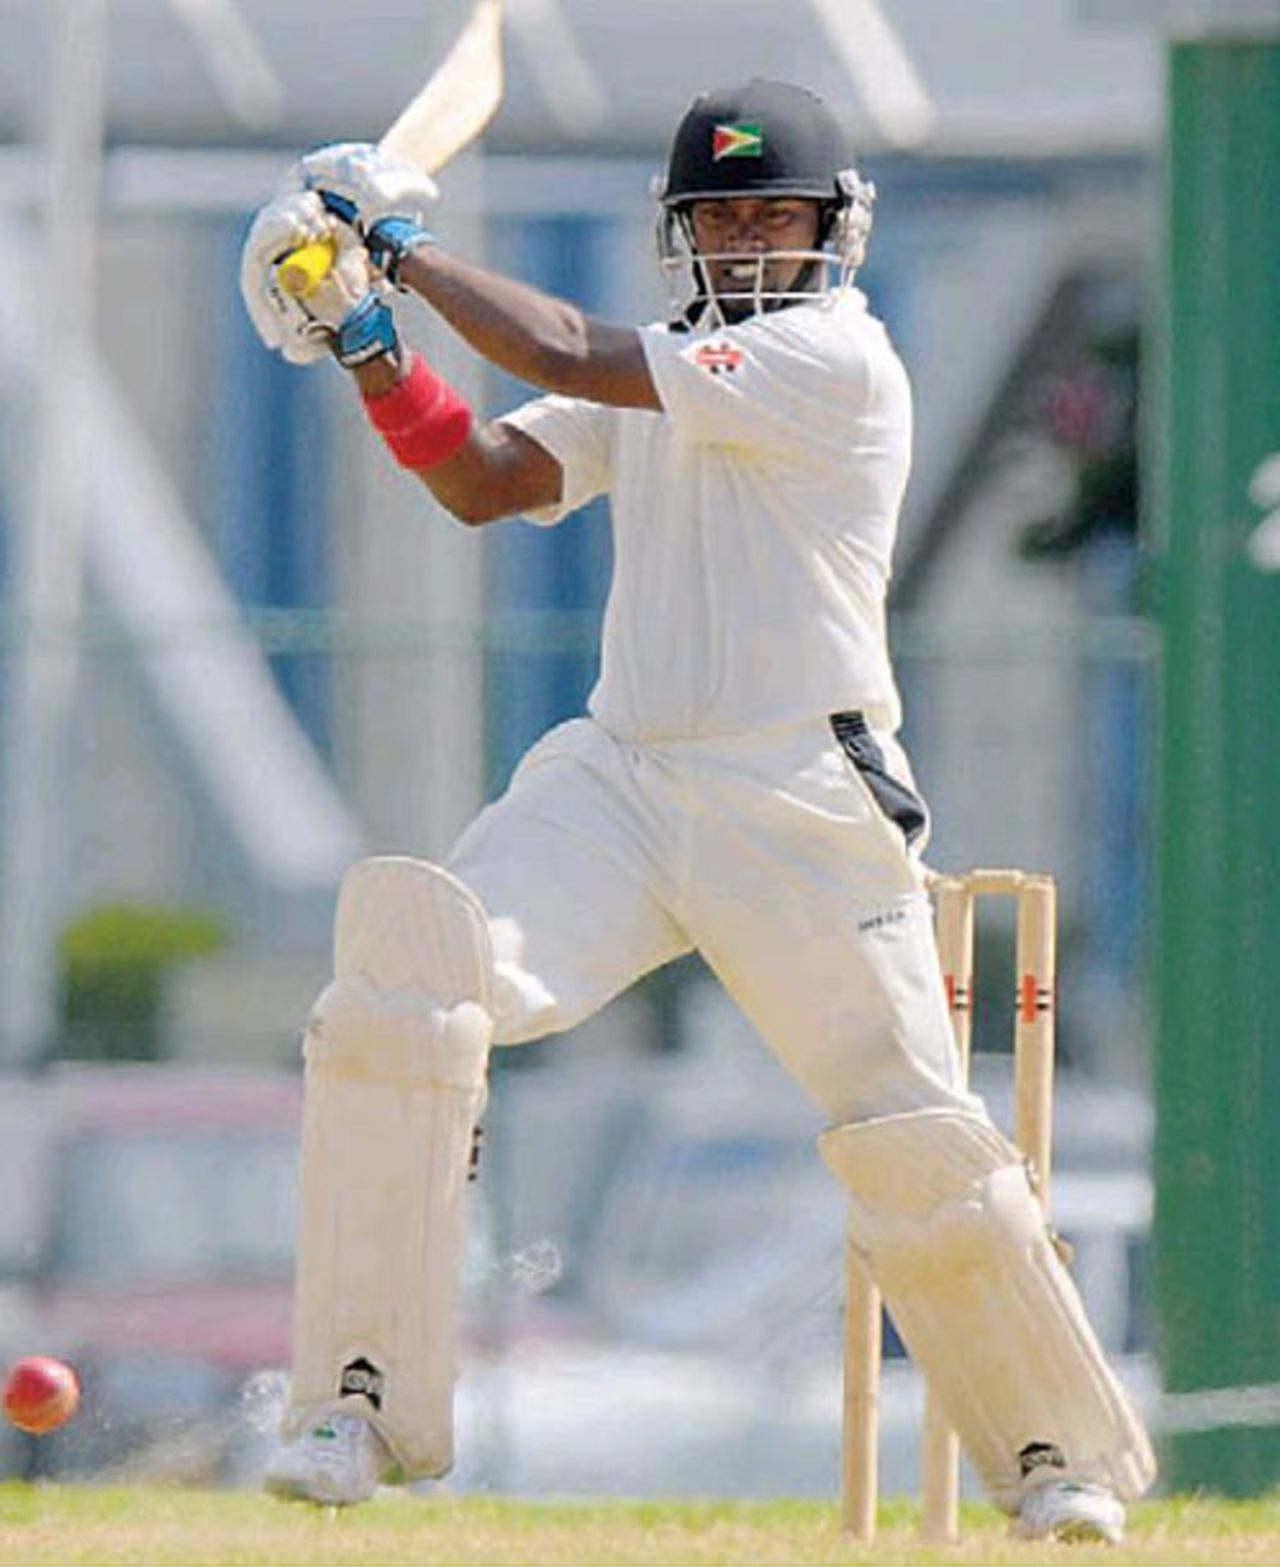 Narsingh Deonarine on his way to 86 in a losing cause, Combined Campuses and Colleges v Guyana, Barbados, January 19, 2009